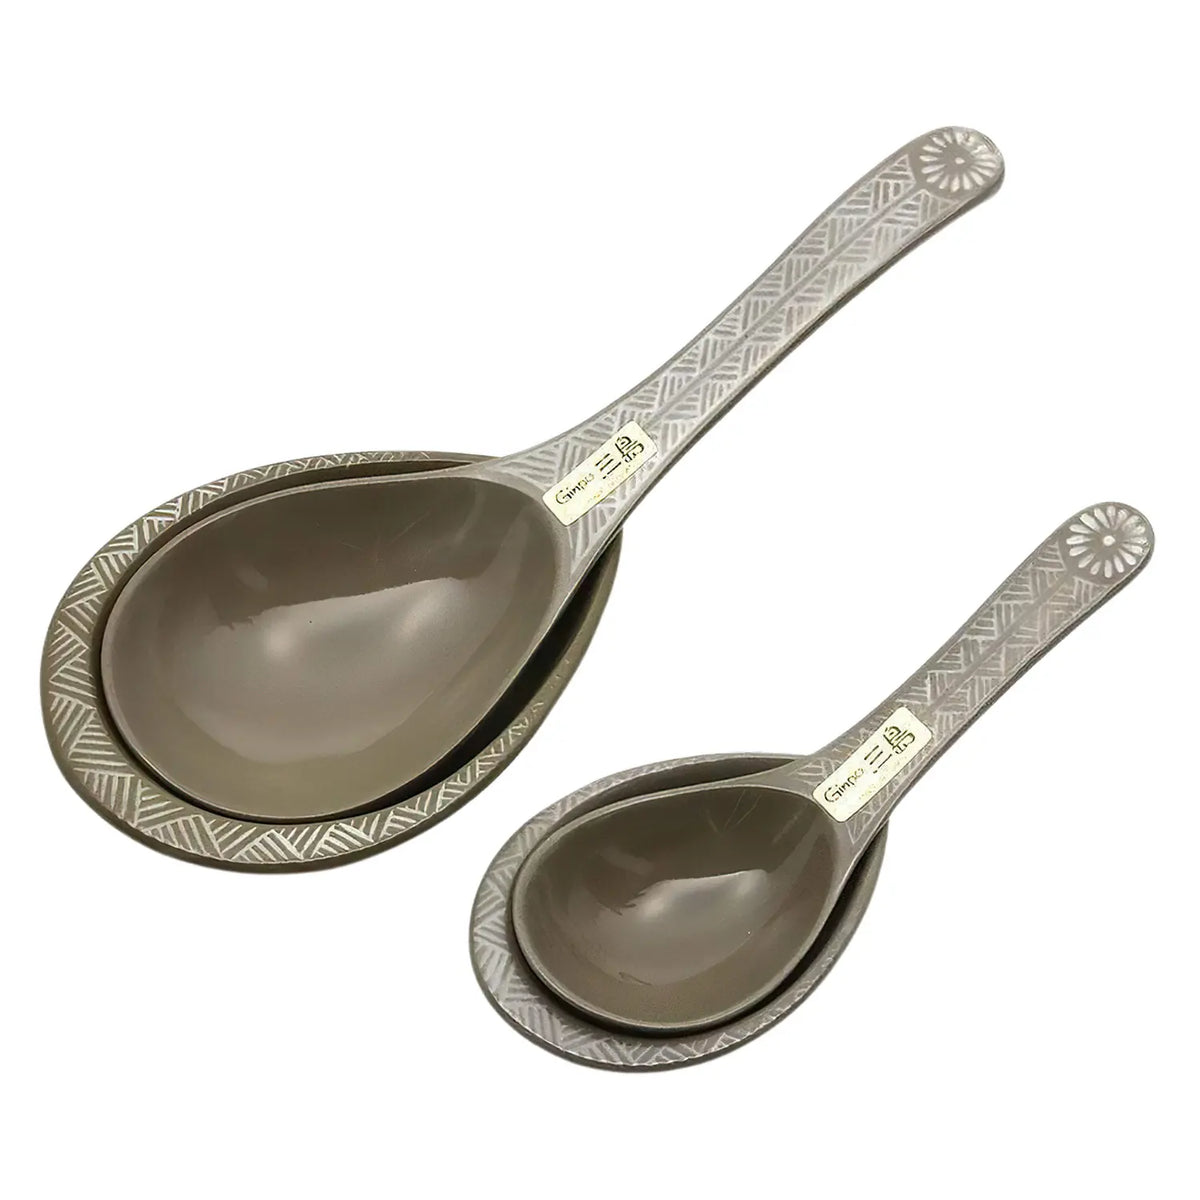 Ginpo Banko Ware Renge Soup Spoon &amp; Spoon Rest